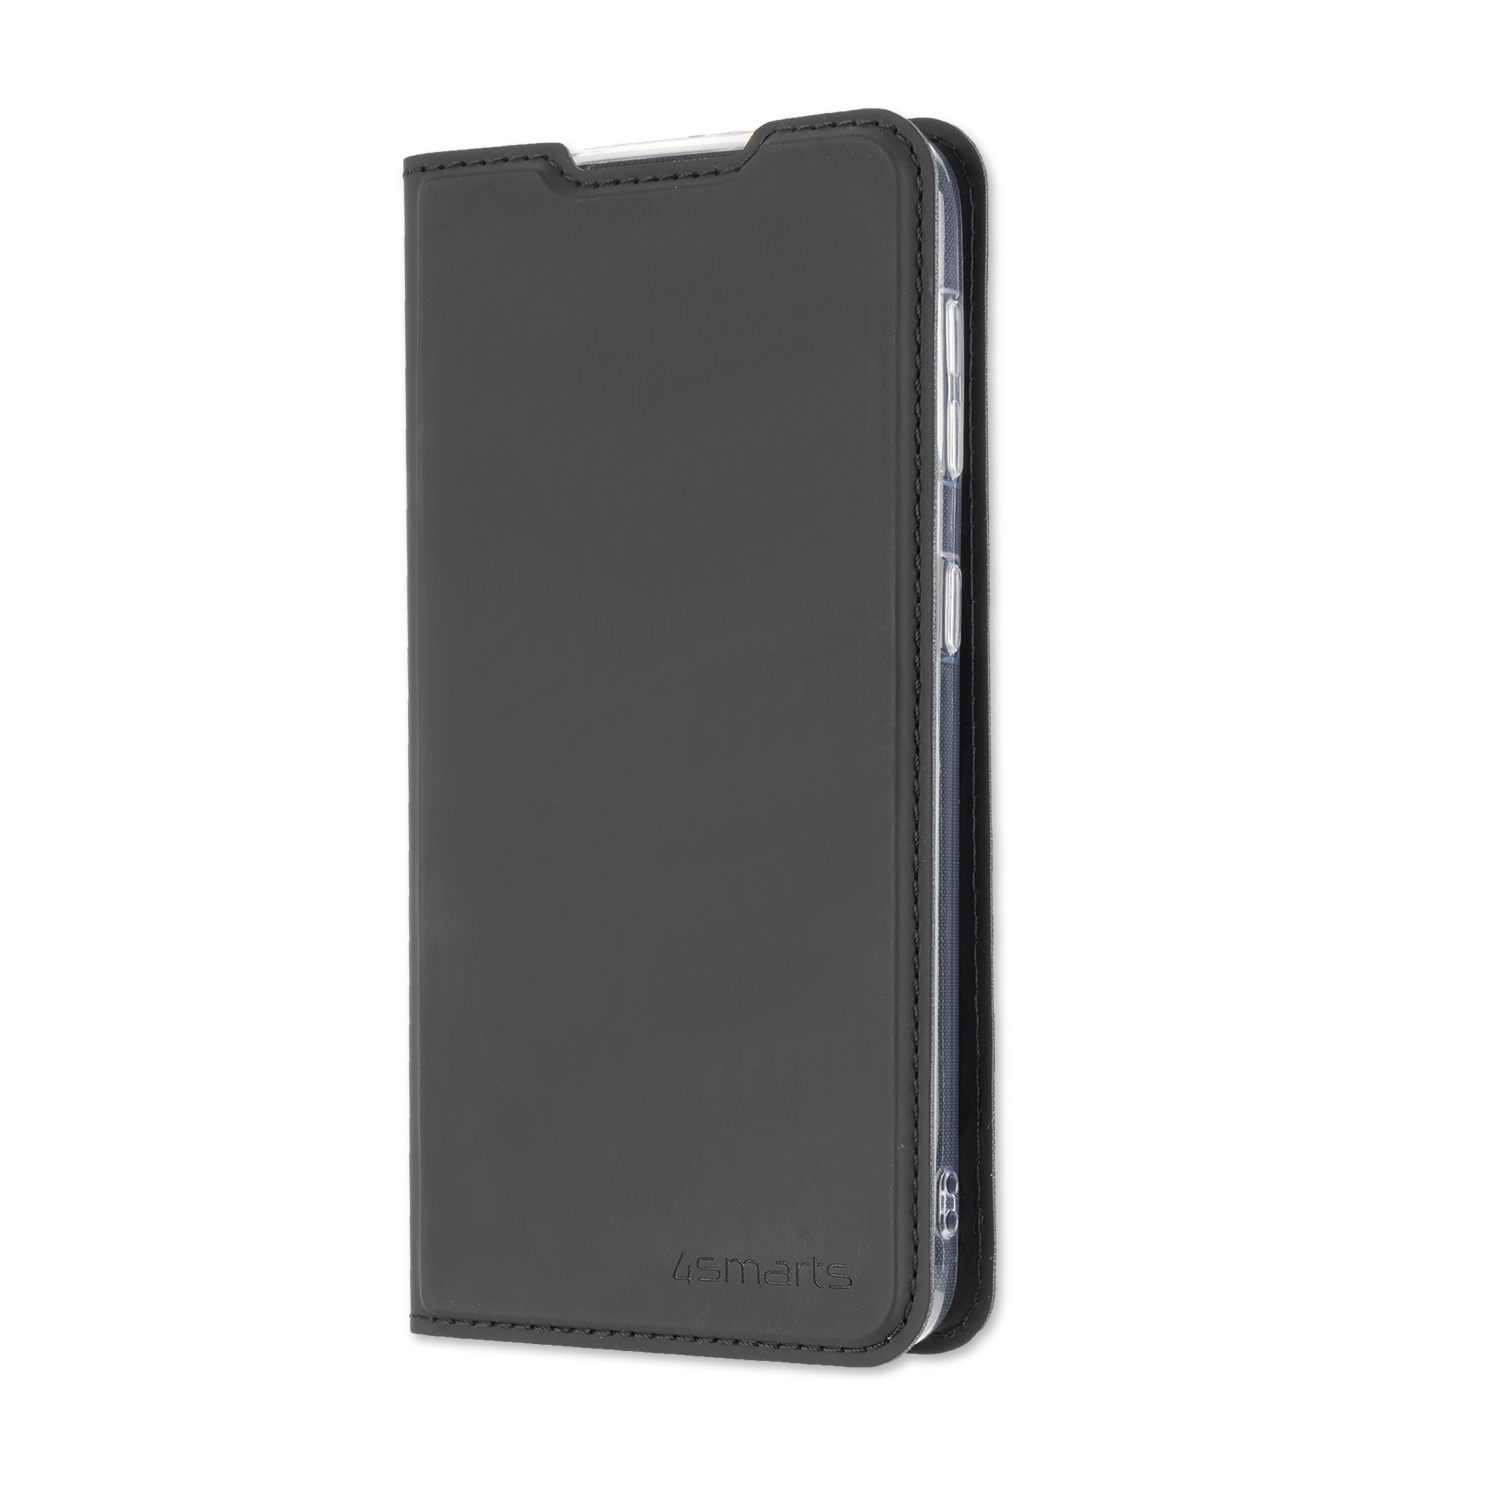 Samsung Galaxy XCover6 Pro case is slim and fits in any pocket without being bulky.